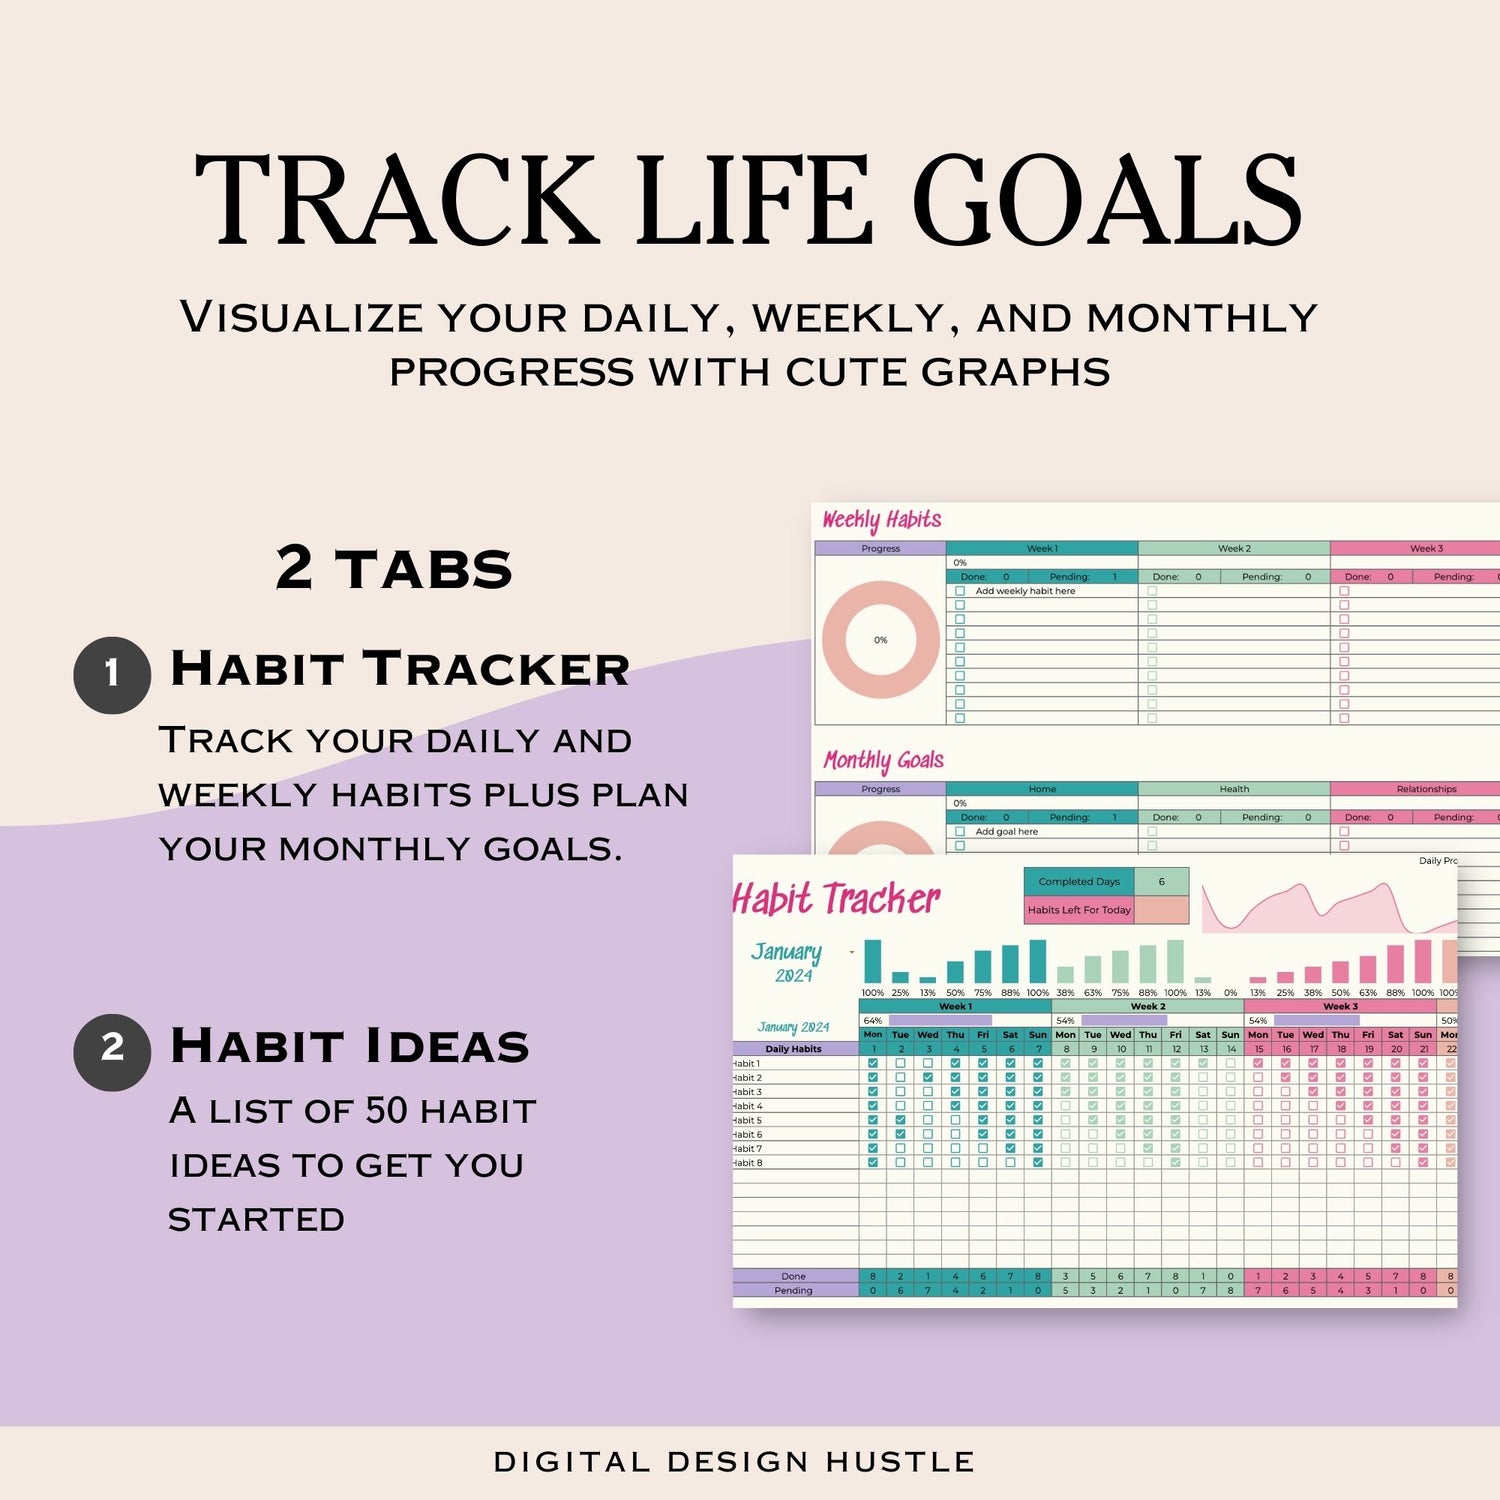 Transform your habits with our powerful Habit Tracker for Google Sheets! This customizable spreadsheet is designed to help you track up to 15 daily habits and 10 weekly habits effortlessly. Whether you&